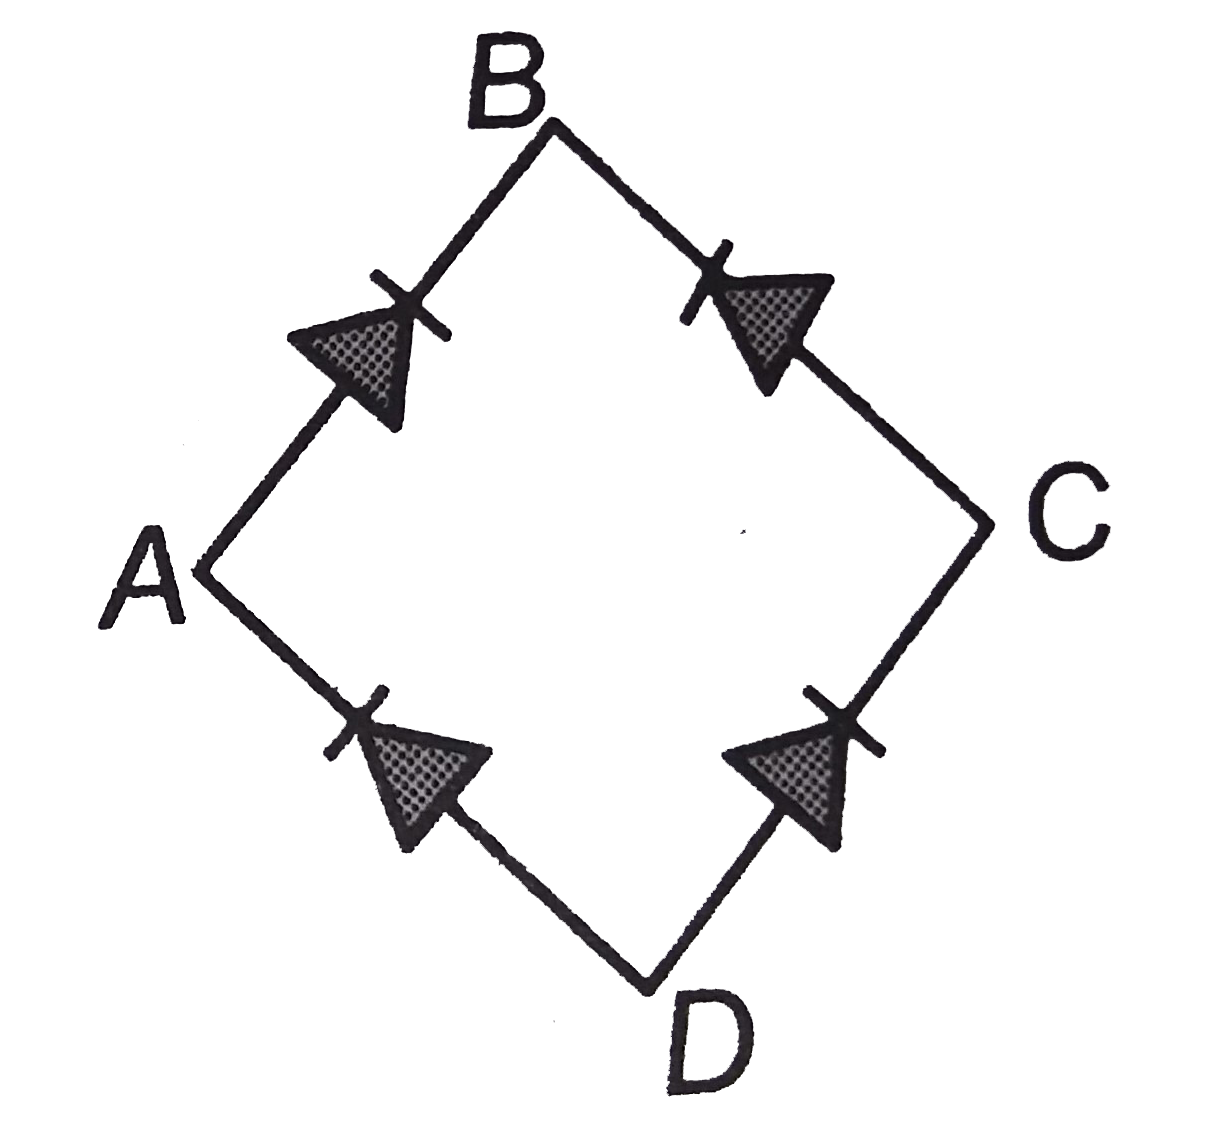 In the diagram, the input is across the terminals A and C and the output is across the terminals B and D, then the outputs is